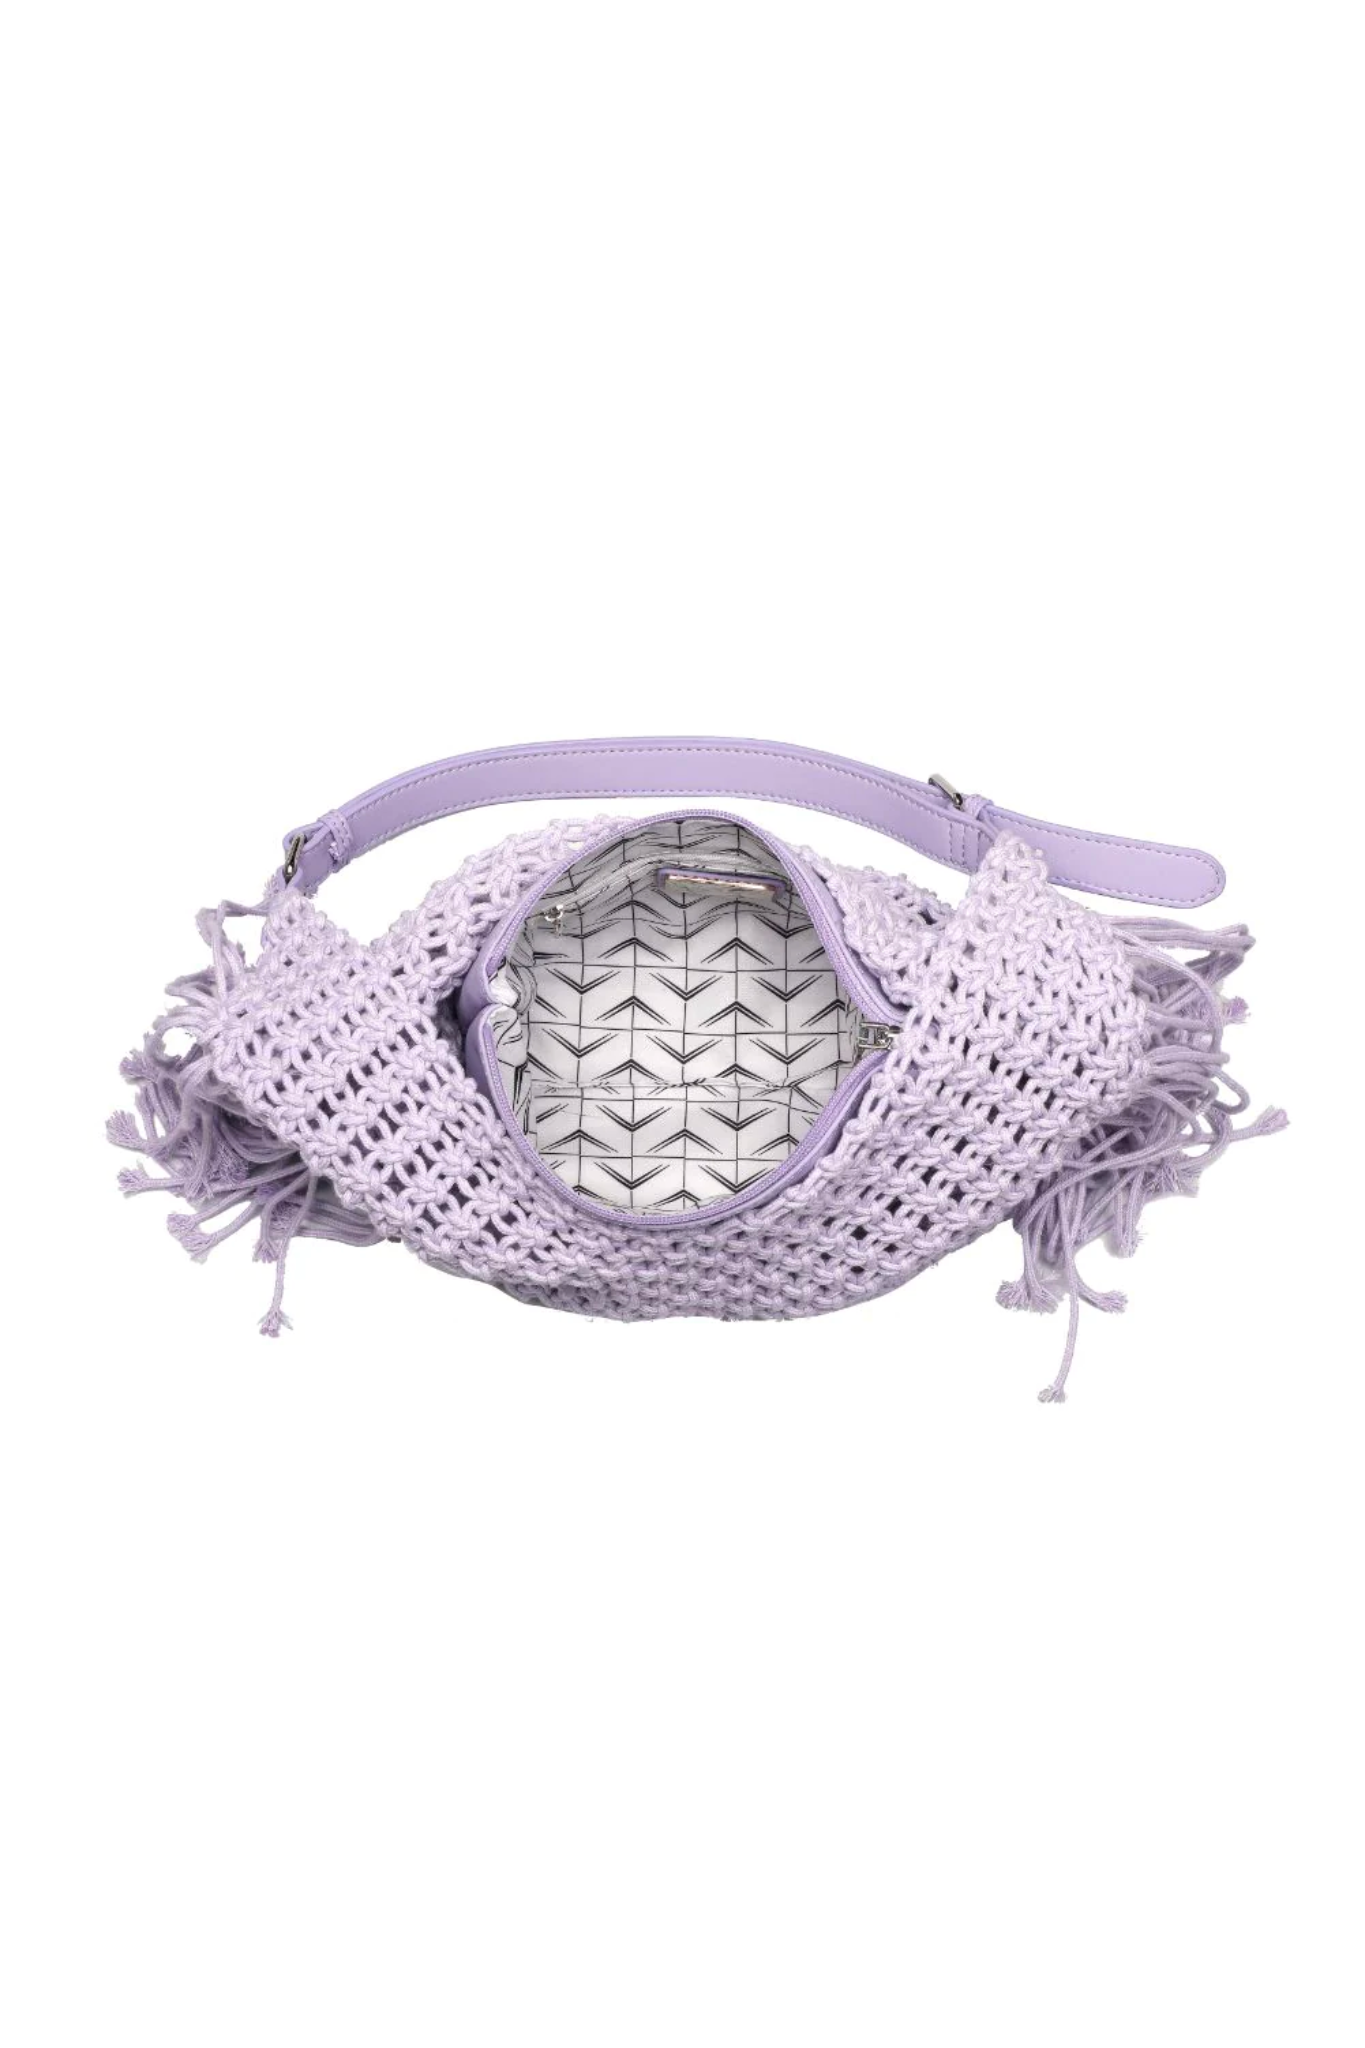 View 4 of Ariel Crochet Hobo Bag in Lilac, a Bags from Larrea Cove. Detail: .